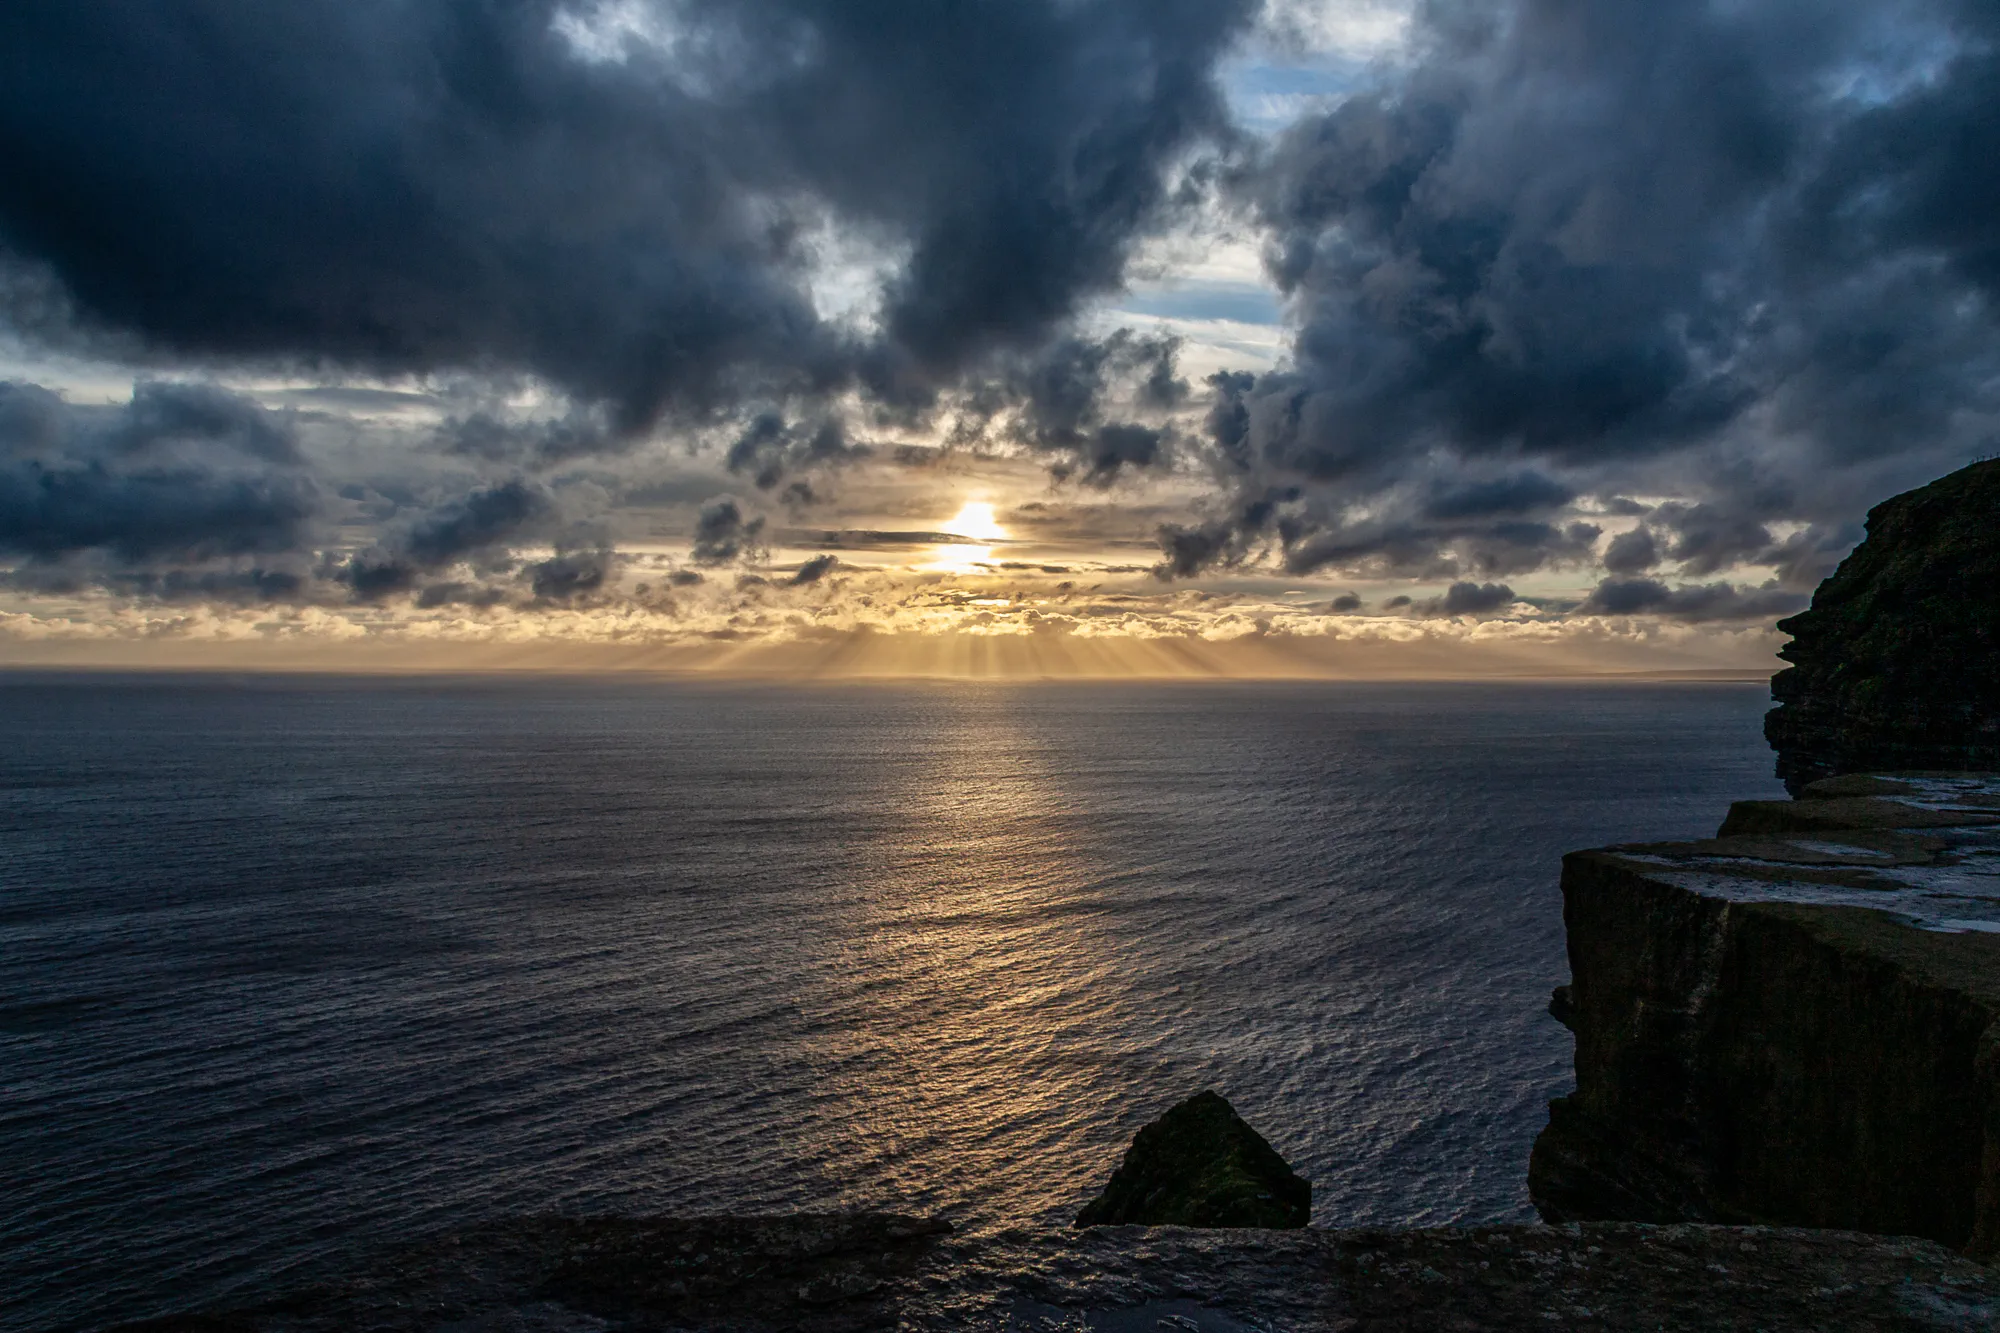 Sunset off the Cliffs of Moher